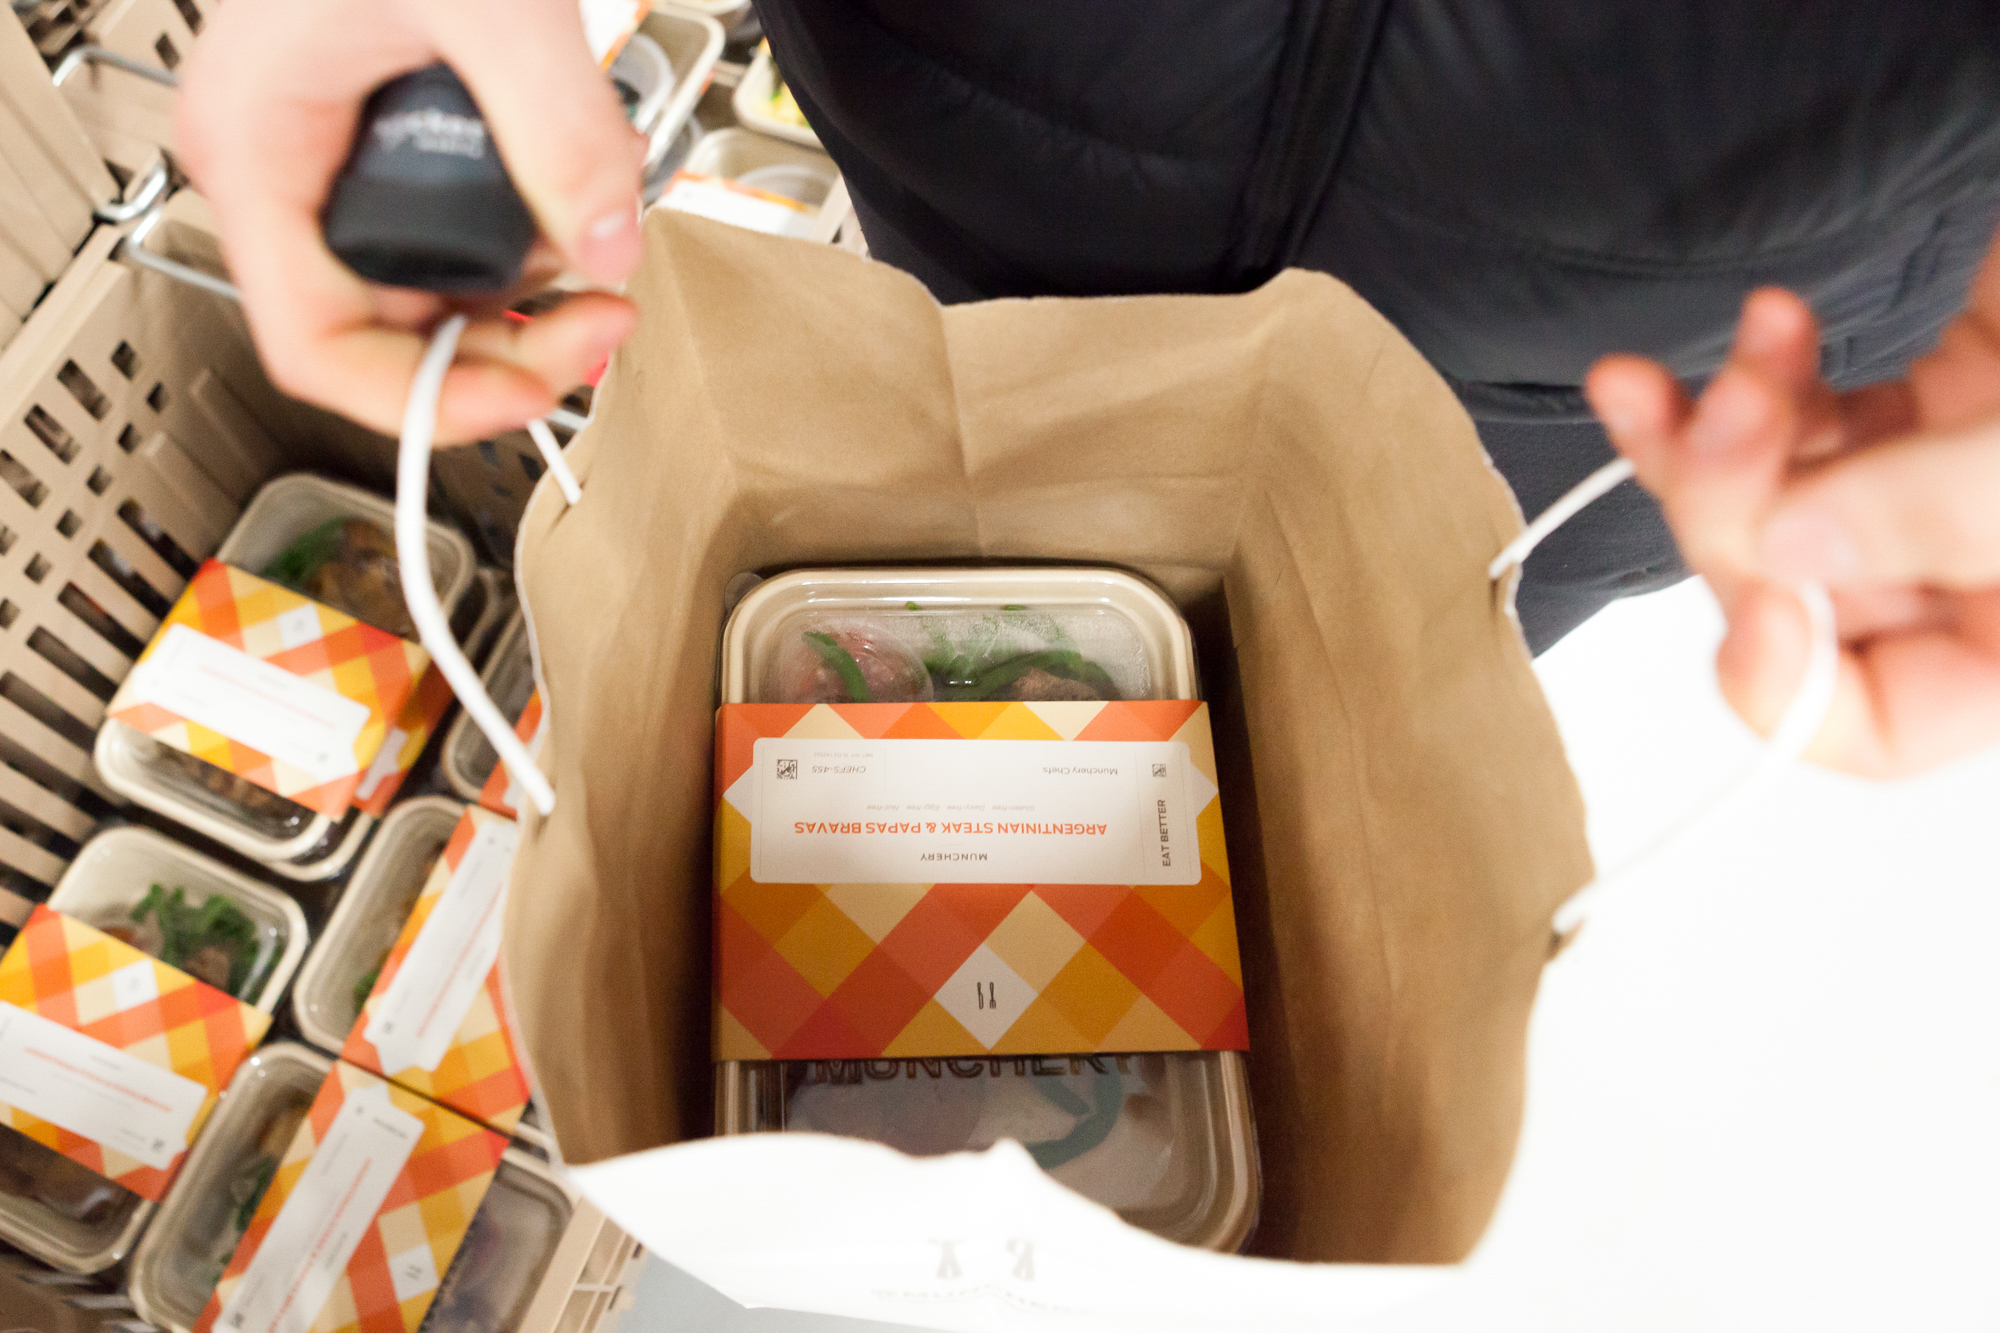 A packaged Munchery meal